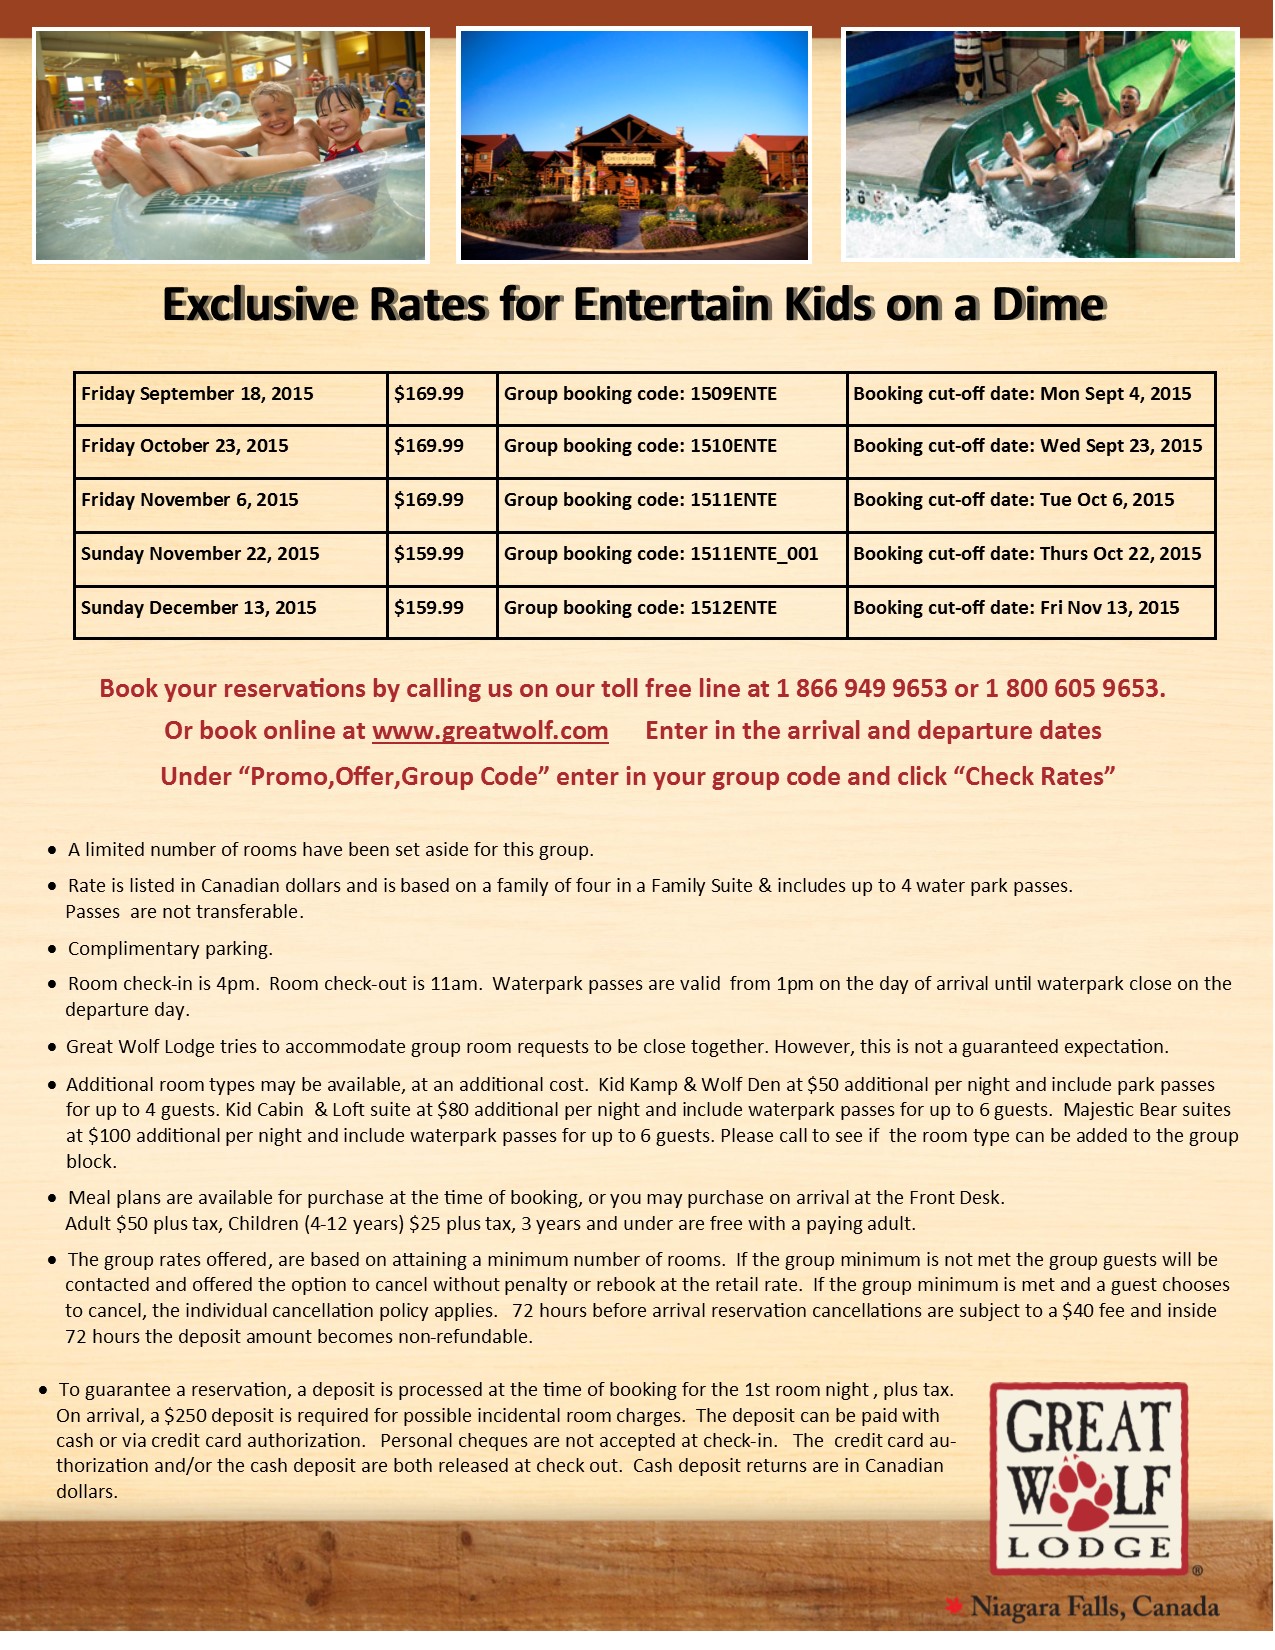 GREAT WOLF LODGE DEALS | Entertain Kids on a Dime Blog